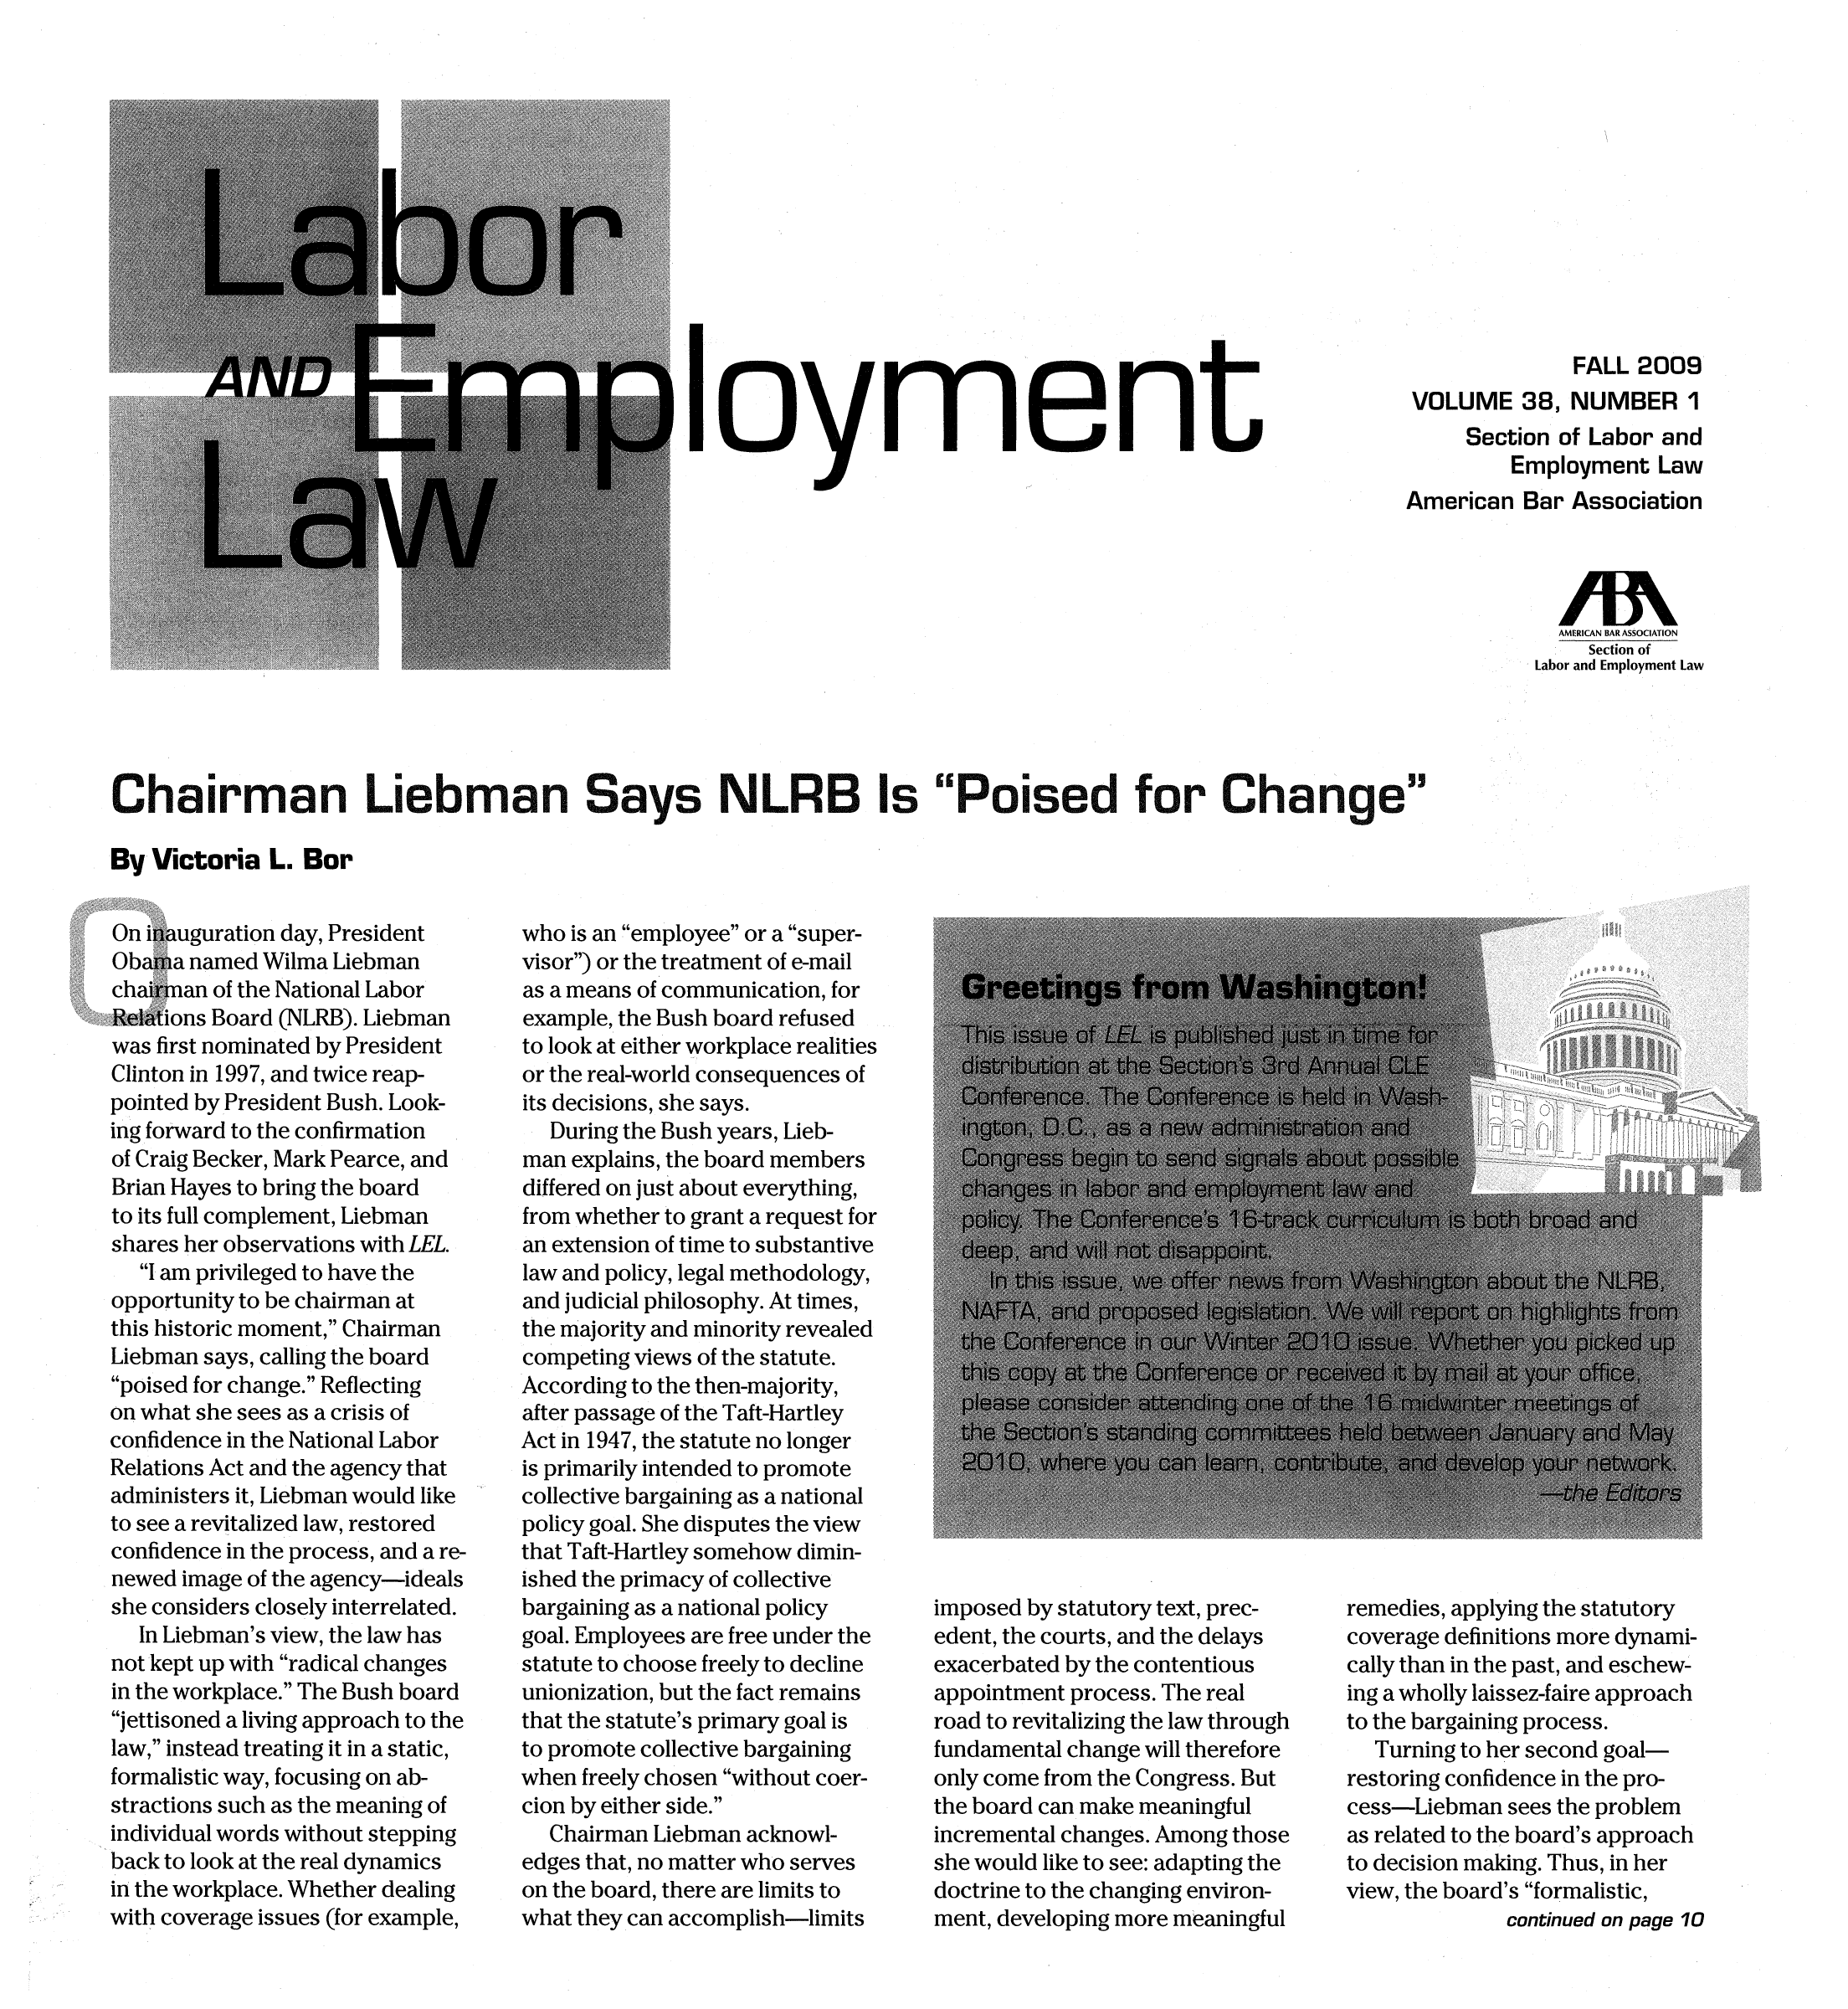 handle is hein.journals/laboemplo38 and id is 1 raw text is: lOymenFALL 2009VOLUME 36, NUMBER 1Section of Labor andEmployment LawAmerican Bar AssociationAMERICAN BAR ASSOCIATIONSection ofLabor and Employment LawChairman Liebman Says NLRB Is Poised for ChangeBy Victoria L. BorOn inauguration day, PresidentObama named Wilma Liebmanchairman of the National LaborRelations Board (NLRB). Liebmanwas first nominated by PresidentClinton in 1997, and twice reap-pointed by President Bush. Look-ing forward to the confirmationof Craig Becker, Mark Pearce, andBrian Hayes to bring the boardto its full complement, Liebmanshares her observations with LEL.I am privileged to have theopportunity to be chairman atthis historic moment, ChairmanLiebman says, calling the boardpoised for change. Reflectingon what she sees as a crisis ofconfidence in the National LaborRelations Act and the agency thatadministers it, Liebman would liketo see a revitalized law, restoredconfidence in the process, and a re-newed image of the agency-idealsshe considers closely interrelated.In Liebman's view, the law hasnot kept up with radical changesin the workplace. The Bush boardjettisoned a living approach to thelaw, instead treating it in a static,formalistic way, focusing on ab-stractions such as the meaning ofindividual words without steppingback to look at the real dynamicsin the workplace. Whether dealingwith coverage issues (for example,who is an employee or a super-visor) or the treatment of e-mailas a means of communication, forexample, the Bush board refusedto look at either workplace realitiesor the real-world consequences ofits decisions, she says.During the Bush years, Lieb-man explains, the board membersdiffered on just about everything,from whether to grant a request foran extension of time to substantivelaw and policy, legal methodology,and judicial philosophy. At times,the majority and minority revealedcompeting views of the statute.According to the then-majority,after passage of the Taft-HartleyAct in 1947, the statute no longeris primarily intended to promotecollective bargaining as a nationalpolicy goal. She disputes the viewthat Taft-Hartley somehow dimin-ished the primacy of collectivebargaining as a national policygoal. Employees are free under thestatute to choose freely to declineunionization, but the fact remainsthat the statute's primary goal isto promote collective bargainingwhen freely chosen without coer-cion by either side.Chairman Liebman acknowl-edges that, no matter who serveson the board, there are limits towhat they can accomplish-limitsimposed by statutory text, prec-edent, the courts, and the delaysexacerbated by the contentiousappointment process. The realroad to revitalizing the law throughfundamental change will thereforeonly come from the Congress. Butthe board can make meaningfulincremental changes. Among thoseshe would like to see: adapting thedoctrine to the changing environ-ment, developing more meaningfulremedies, applying the statutorycoverage definitions more dynami-cally than in the past, and eschew-ing a wholly laissez-faire approachto the bargaining process.Turning to her second goal-restoring confidence in the pro-cess-Liebman sees the problemas related to the board's approachto decision making. Thus, in herview, the board's formalistic,continued on page 10